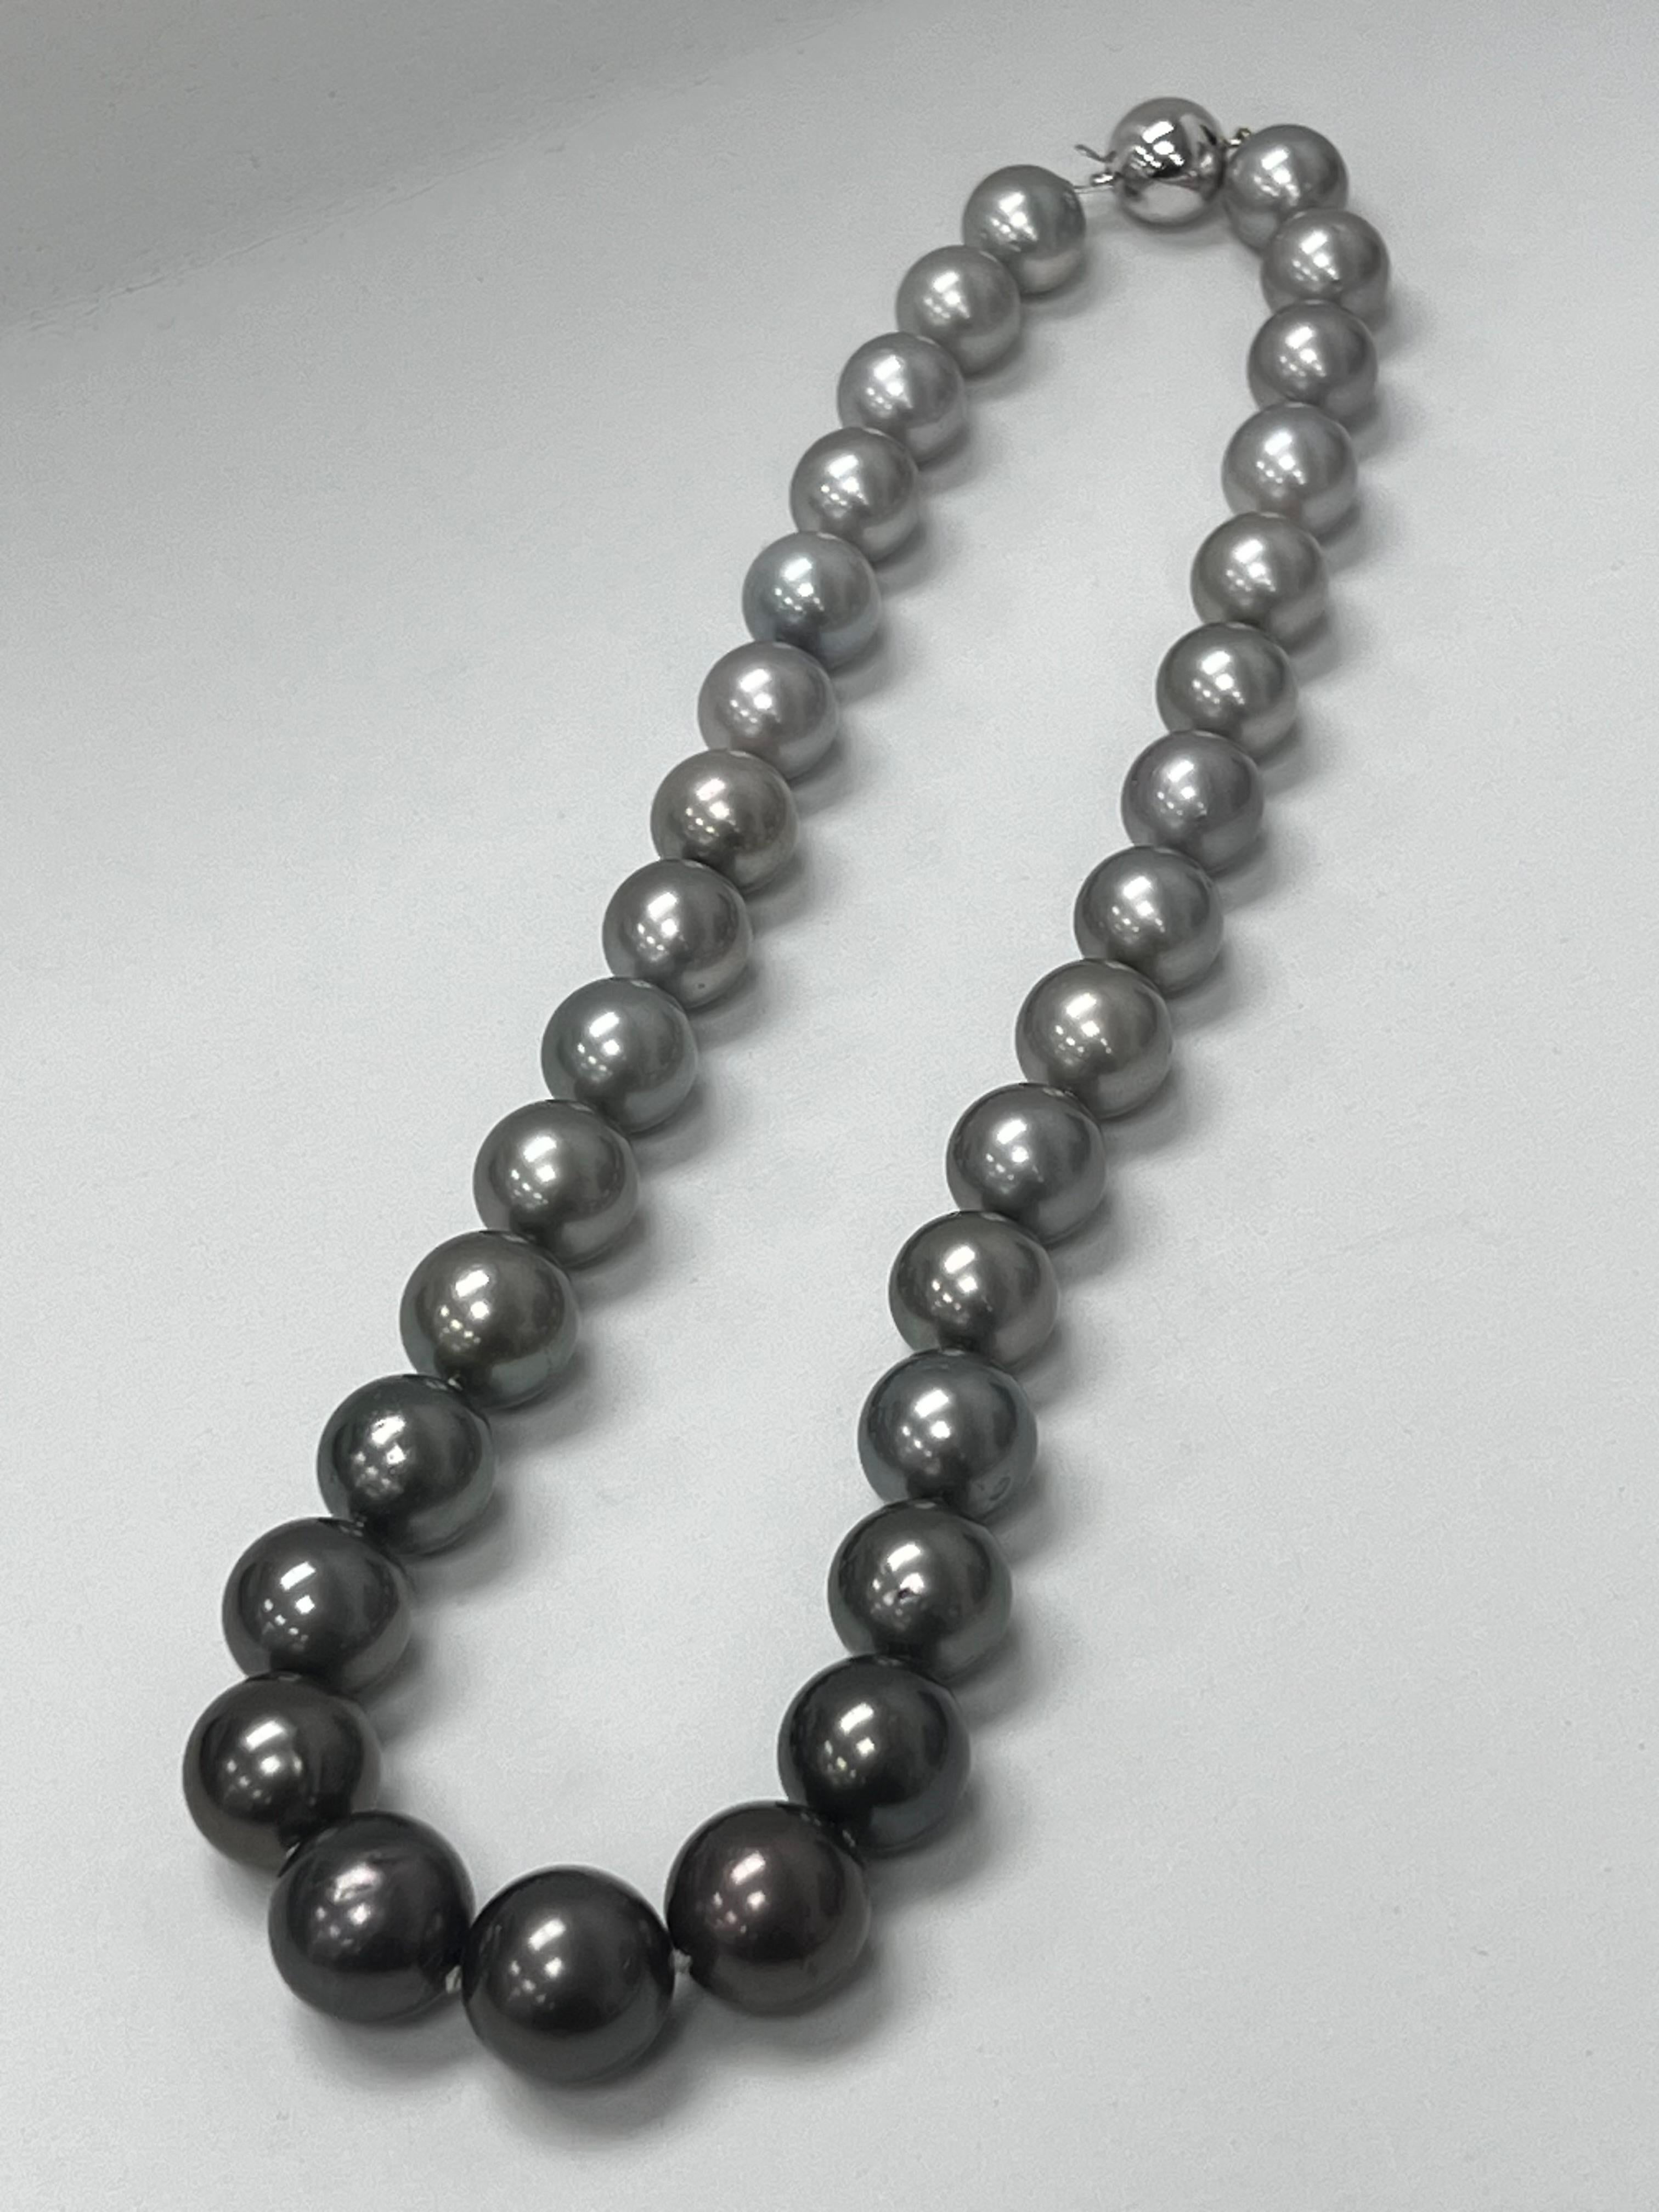 Style and glamour are in the spotlight with this exquisite Tahitian Ombre necklace. This 14-karat round cut necklace is made from 31 pearls with a solid white gold ball clasp. The size of the pearls is 11.6 - 15 mm. The length of this necklace is 17